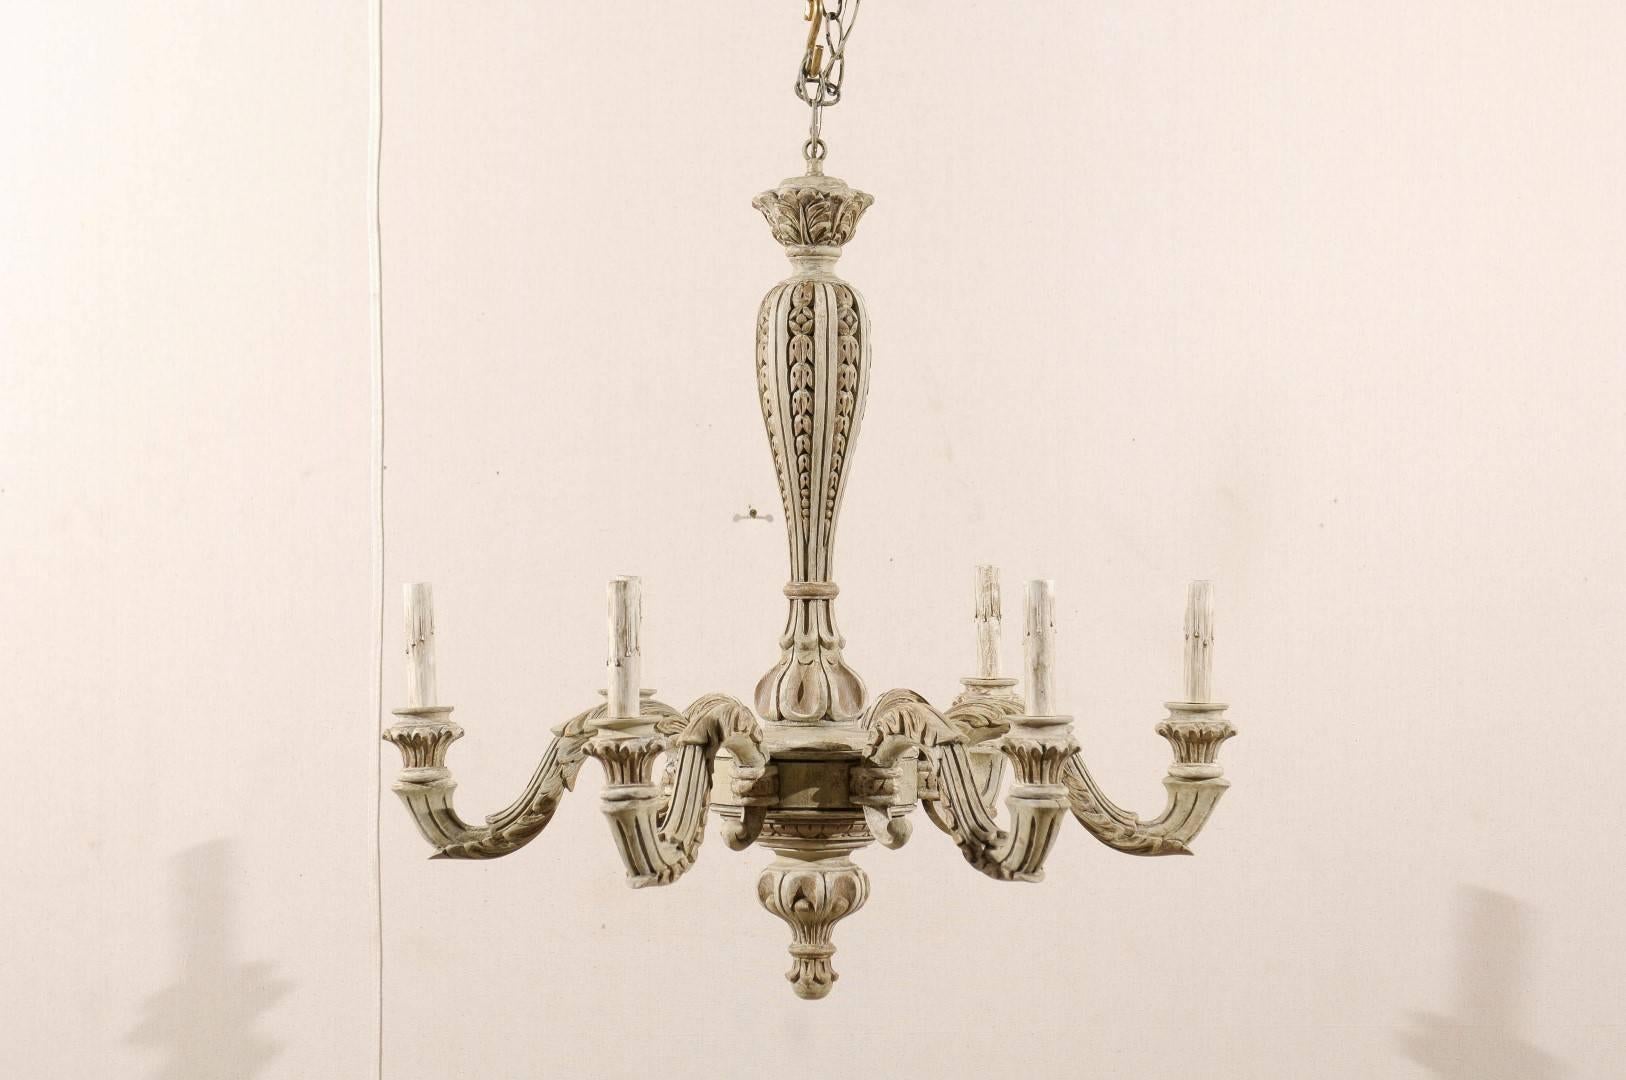 French Six-Light Carved Wood Chandelier with Scroll Arms in Grey-Green Hues 4